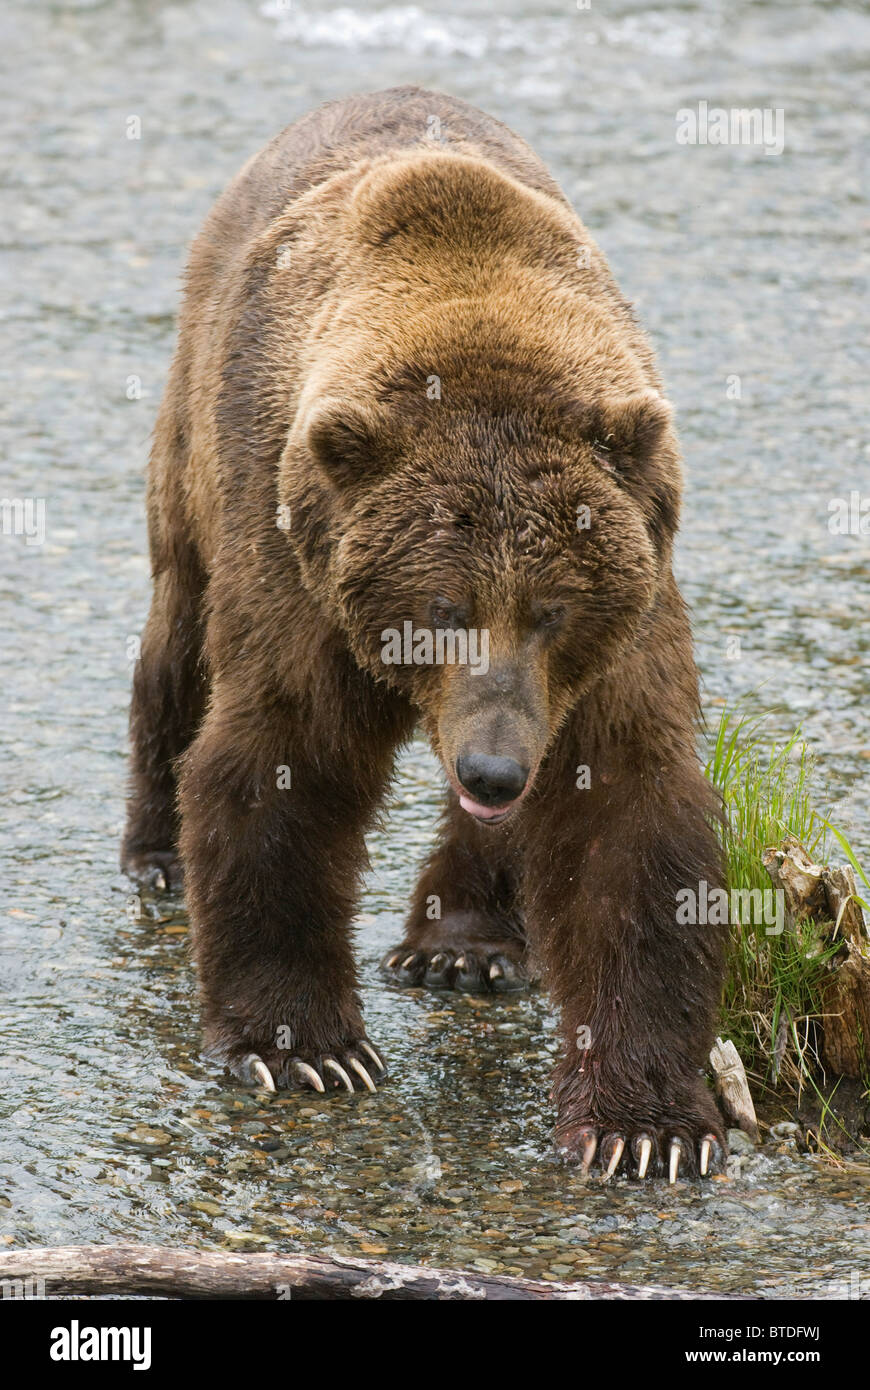 Brown Bear with long claws stands in shallow water of Brooks River, Katmai National Park, Alaska, Digitally altered Stock Photo